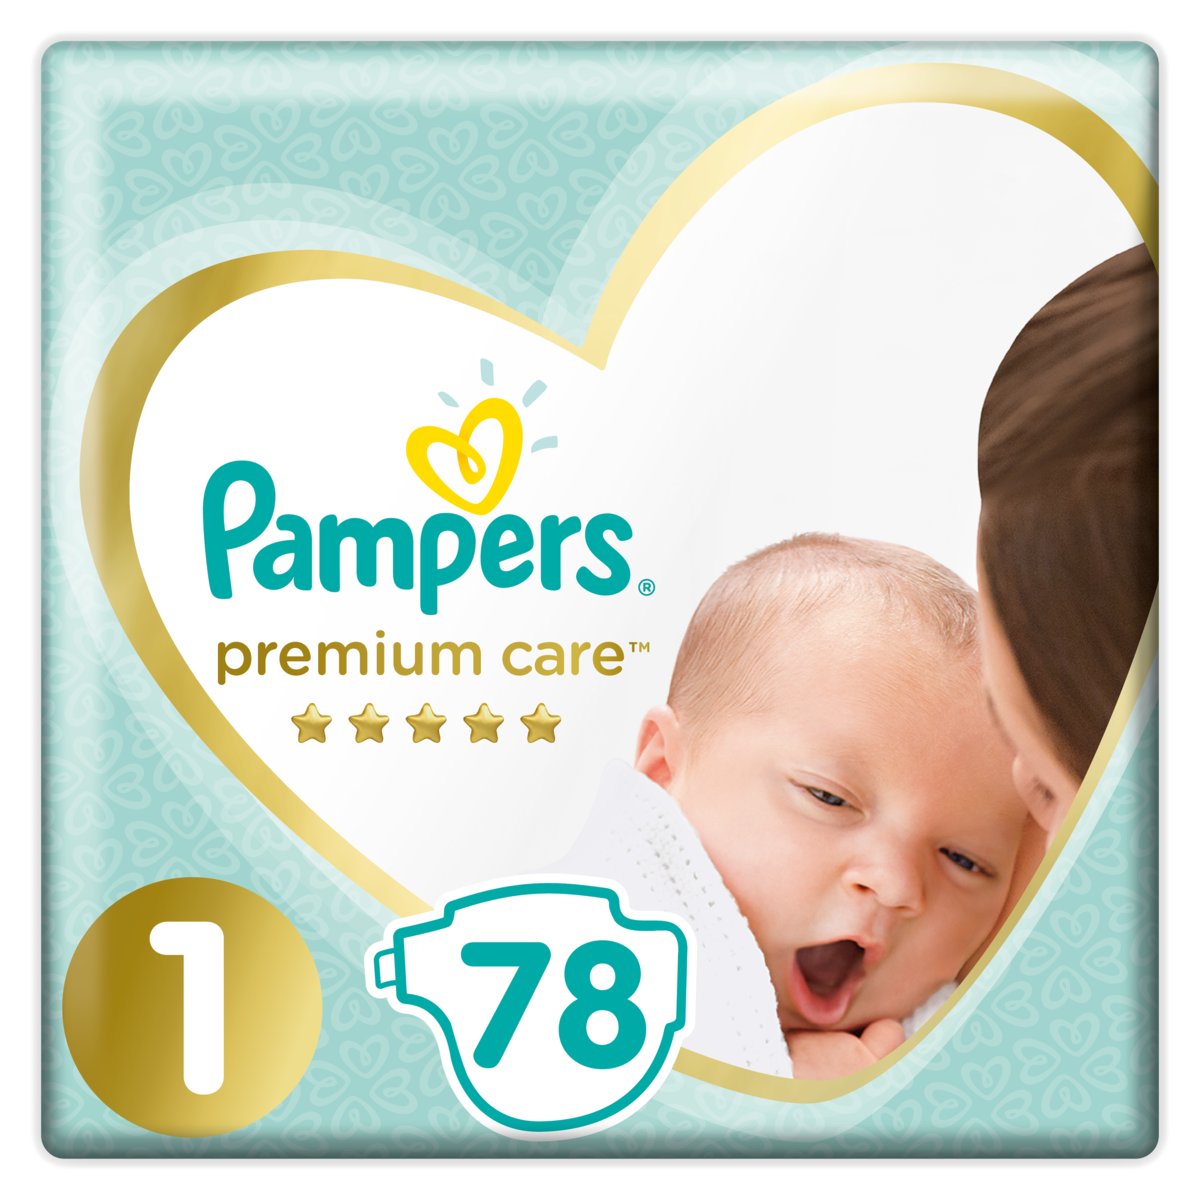 pampers pro care rozmiary